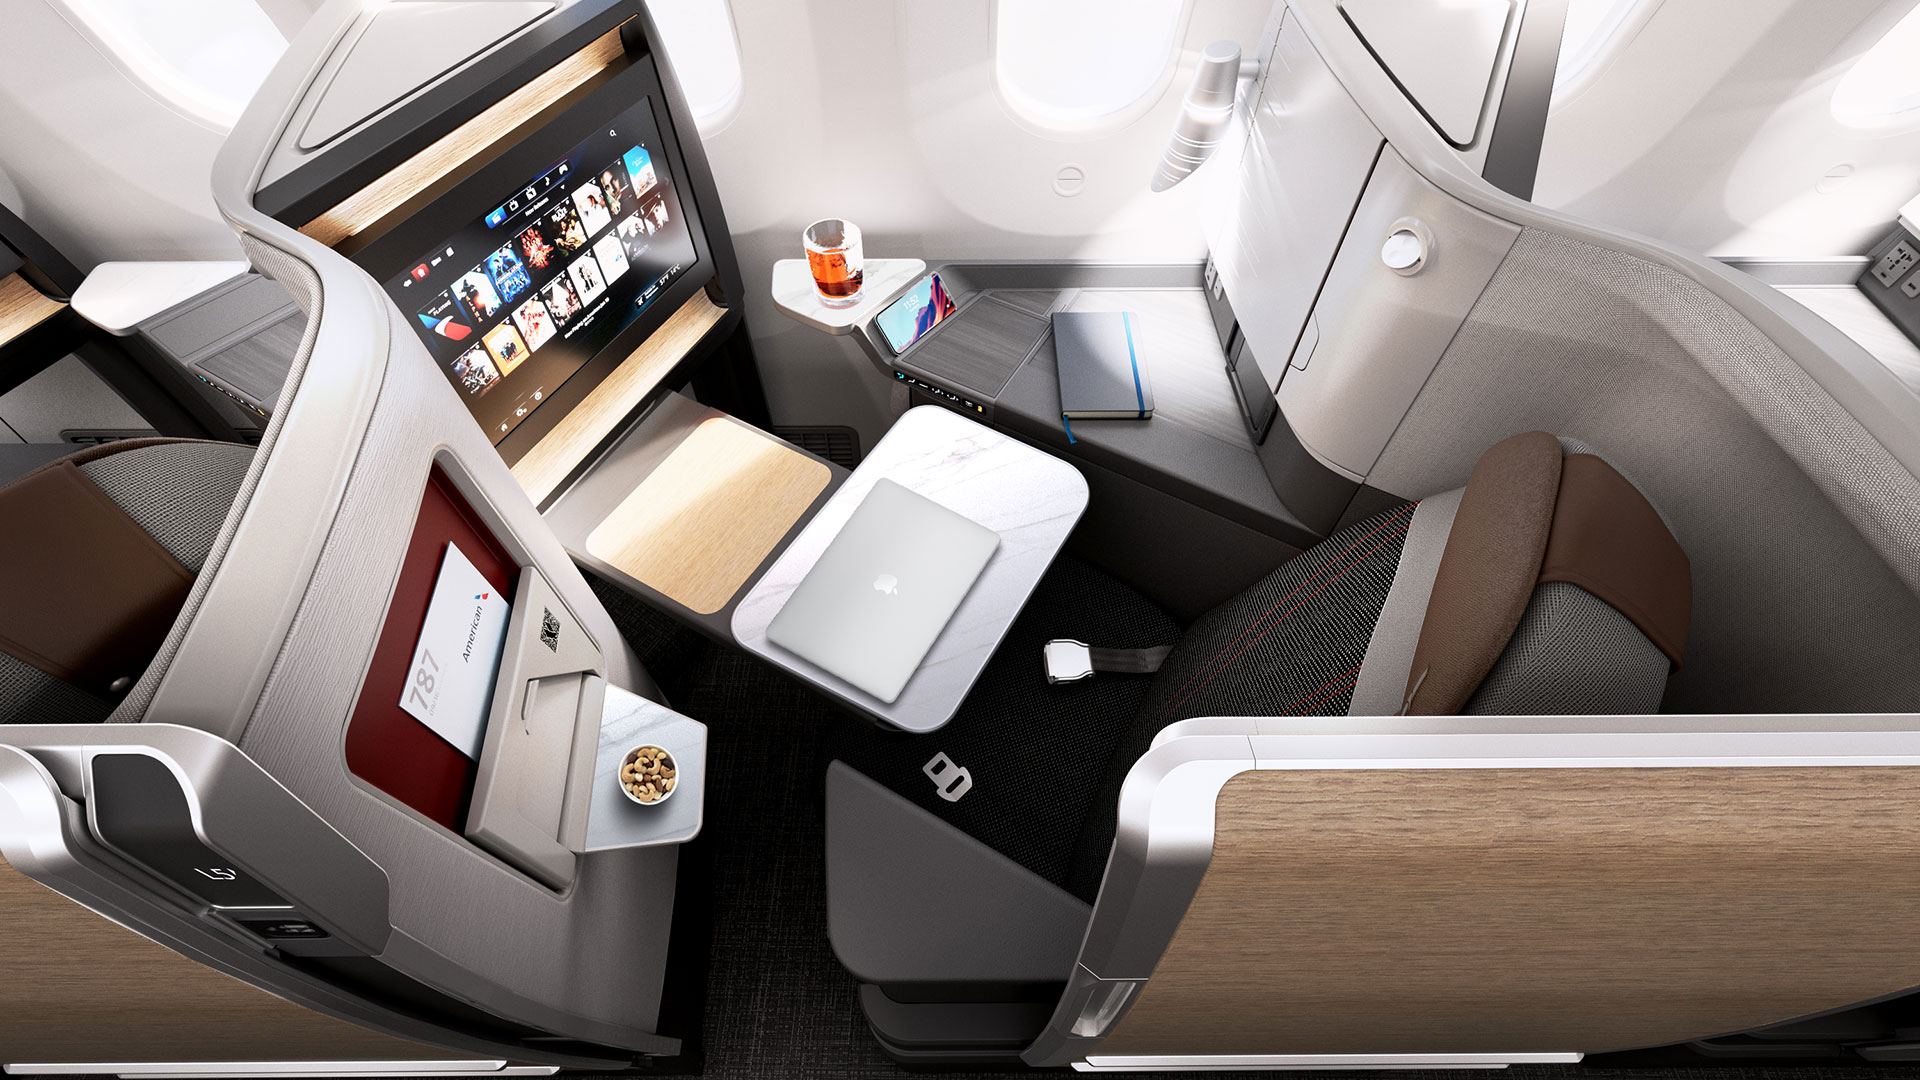 Customers will be surrounded by comfort and ample personal surfaces and storage areas that they can use to meet their individual needs in the boeing 787-9 flagship suite.